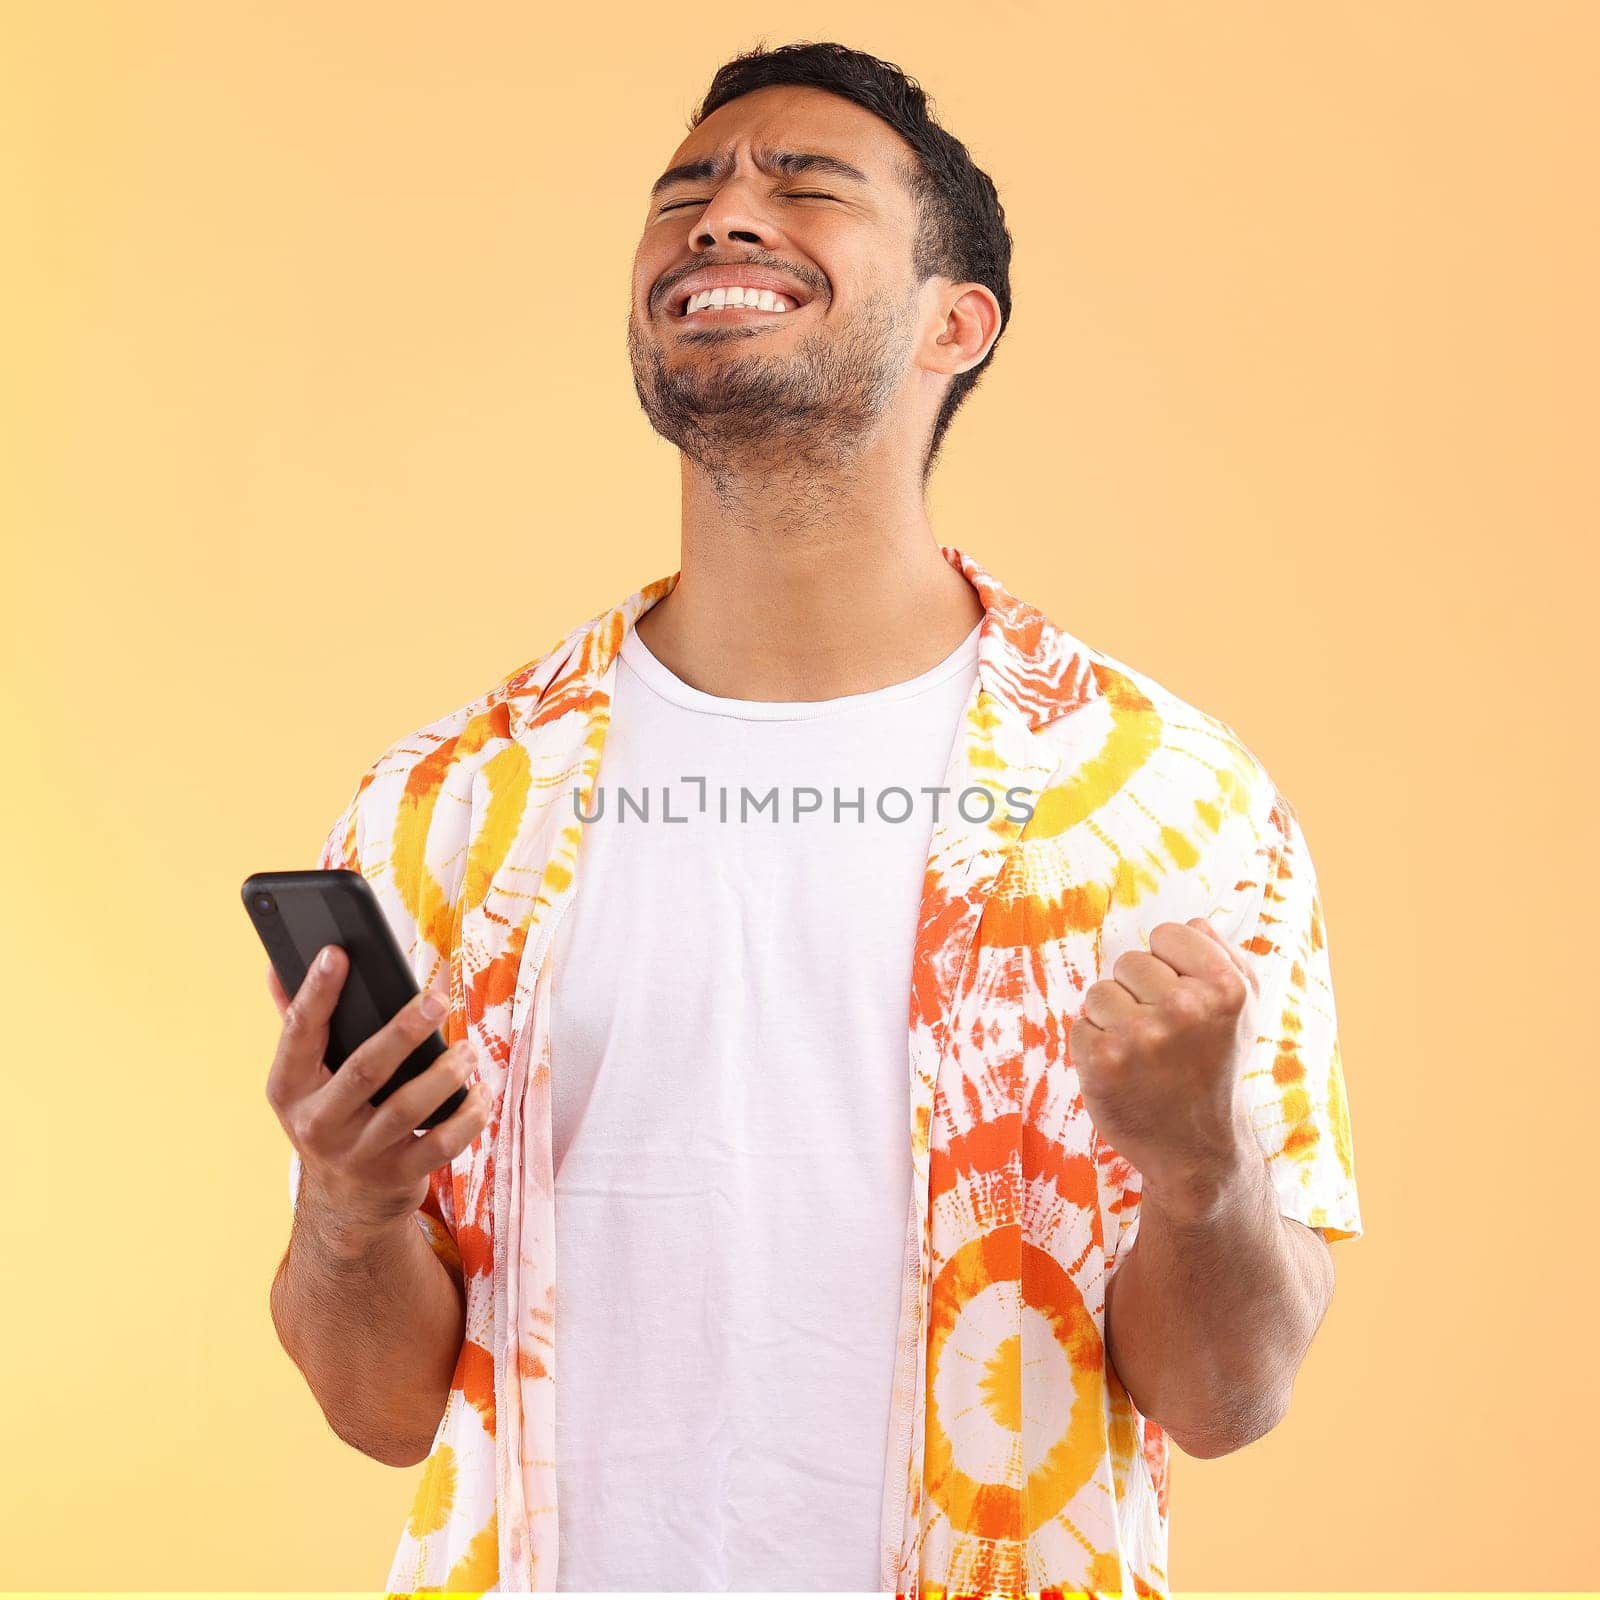 Winner, celebration and man with phone in studio isolated on yellow background. Winning, cellphone or happy male model holding mobile smartphone while celebrating goals achievement, target or success.